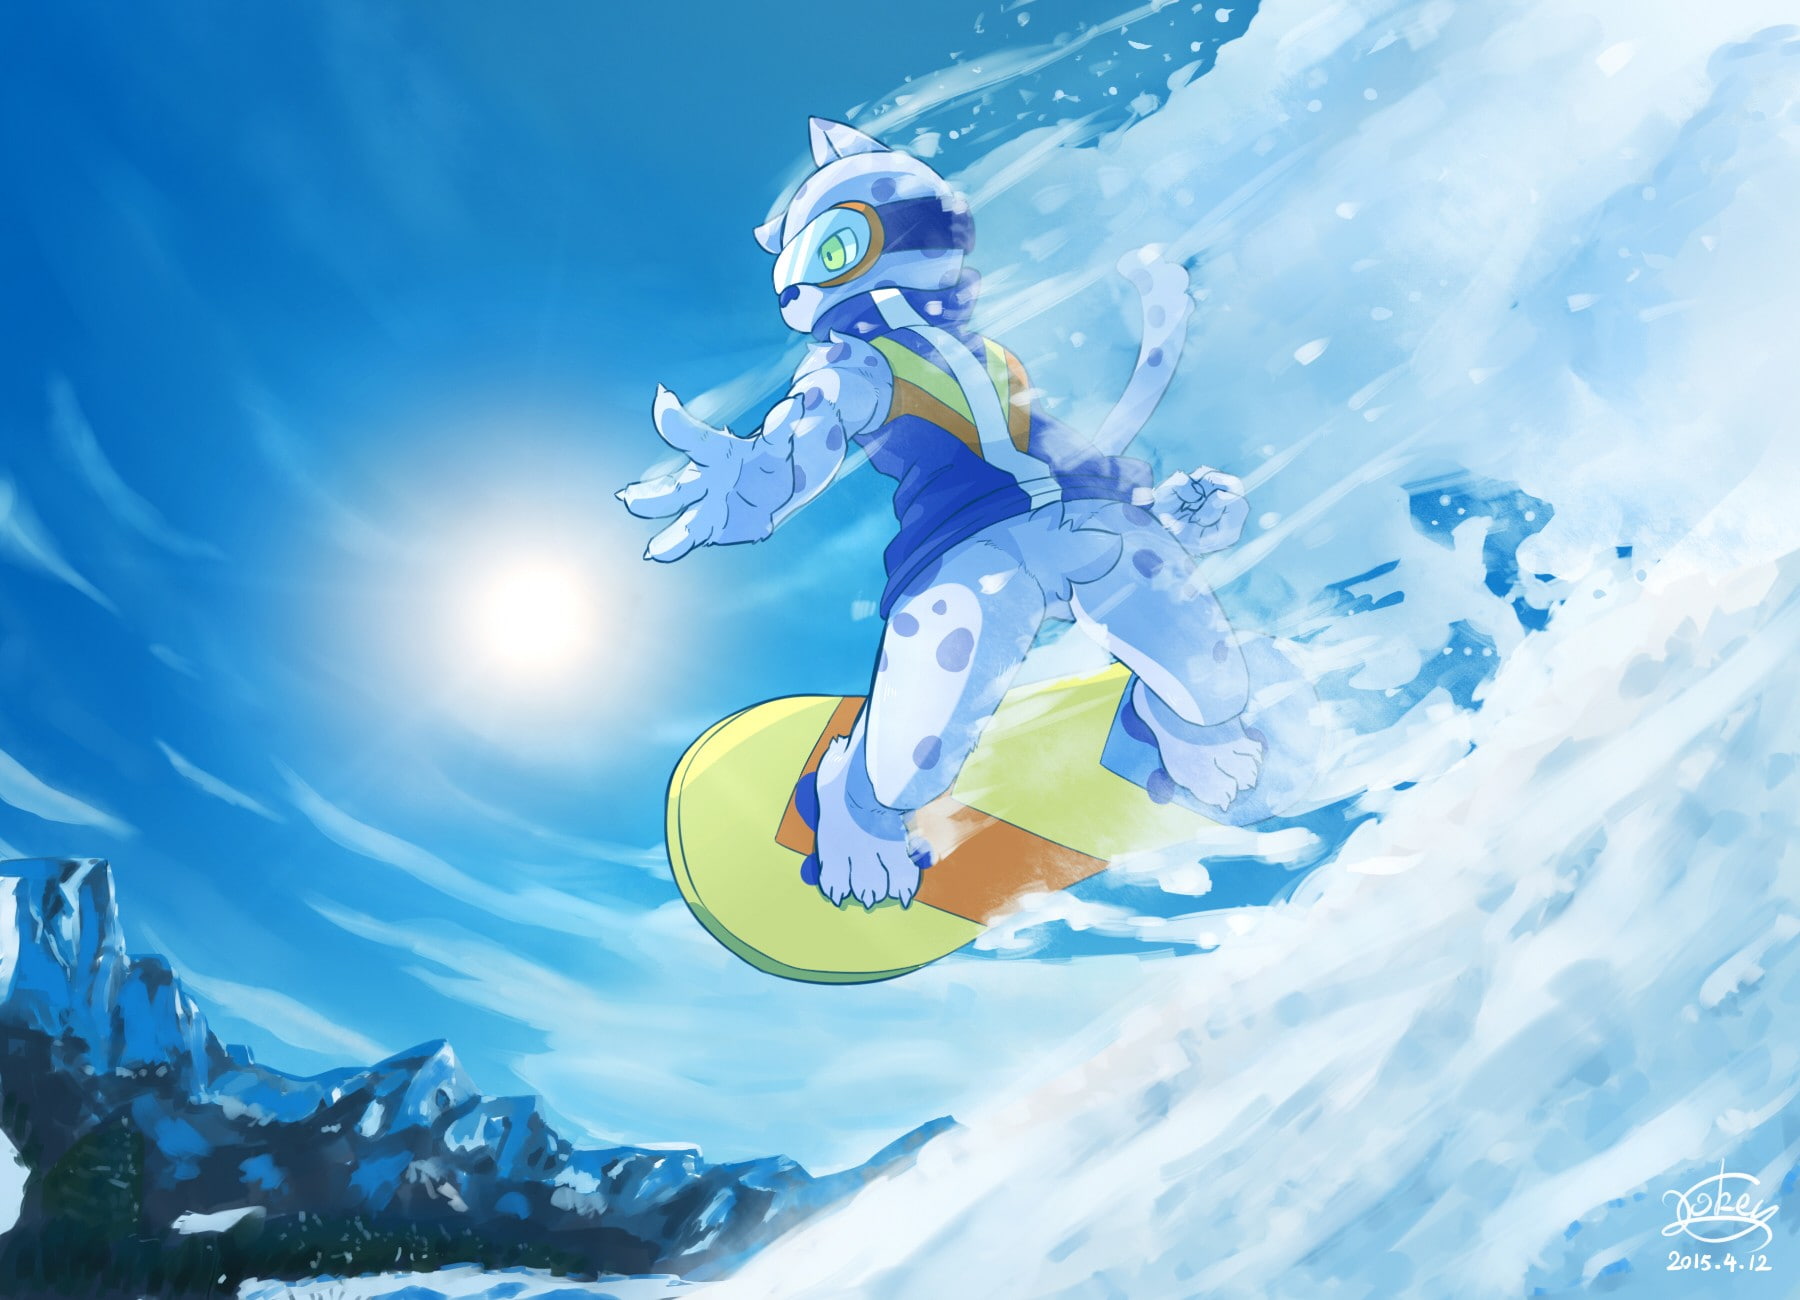 furry, Anthro, snowboarding, sport, full length, nature, one person